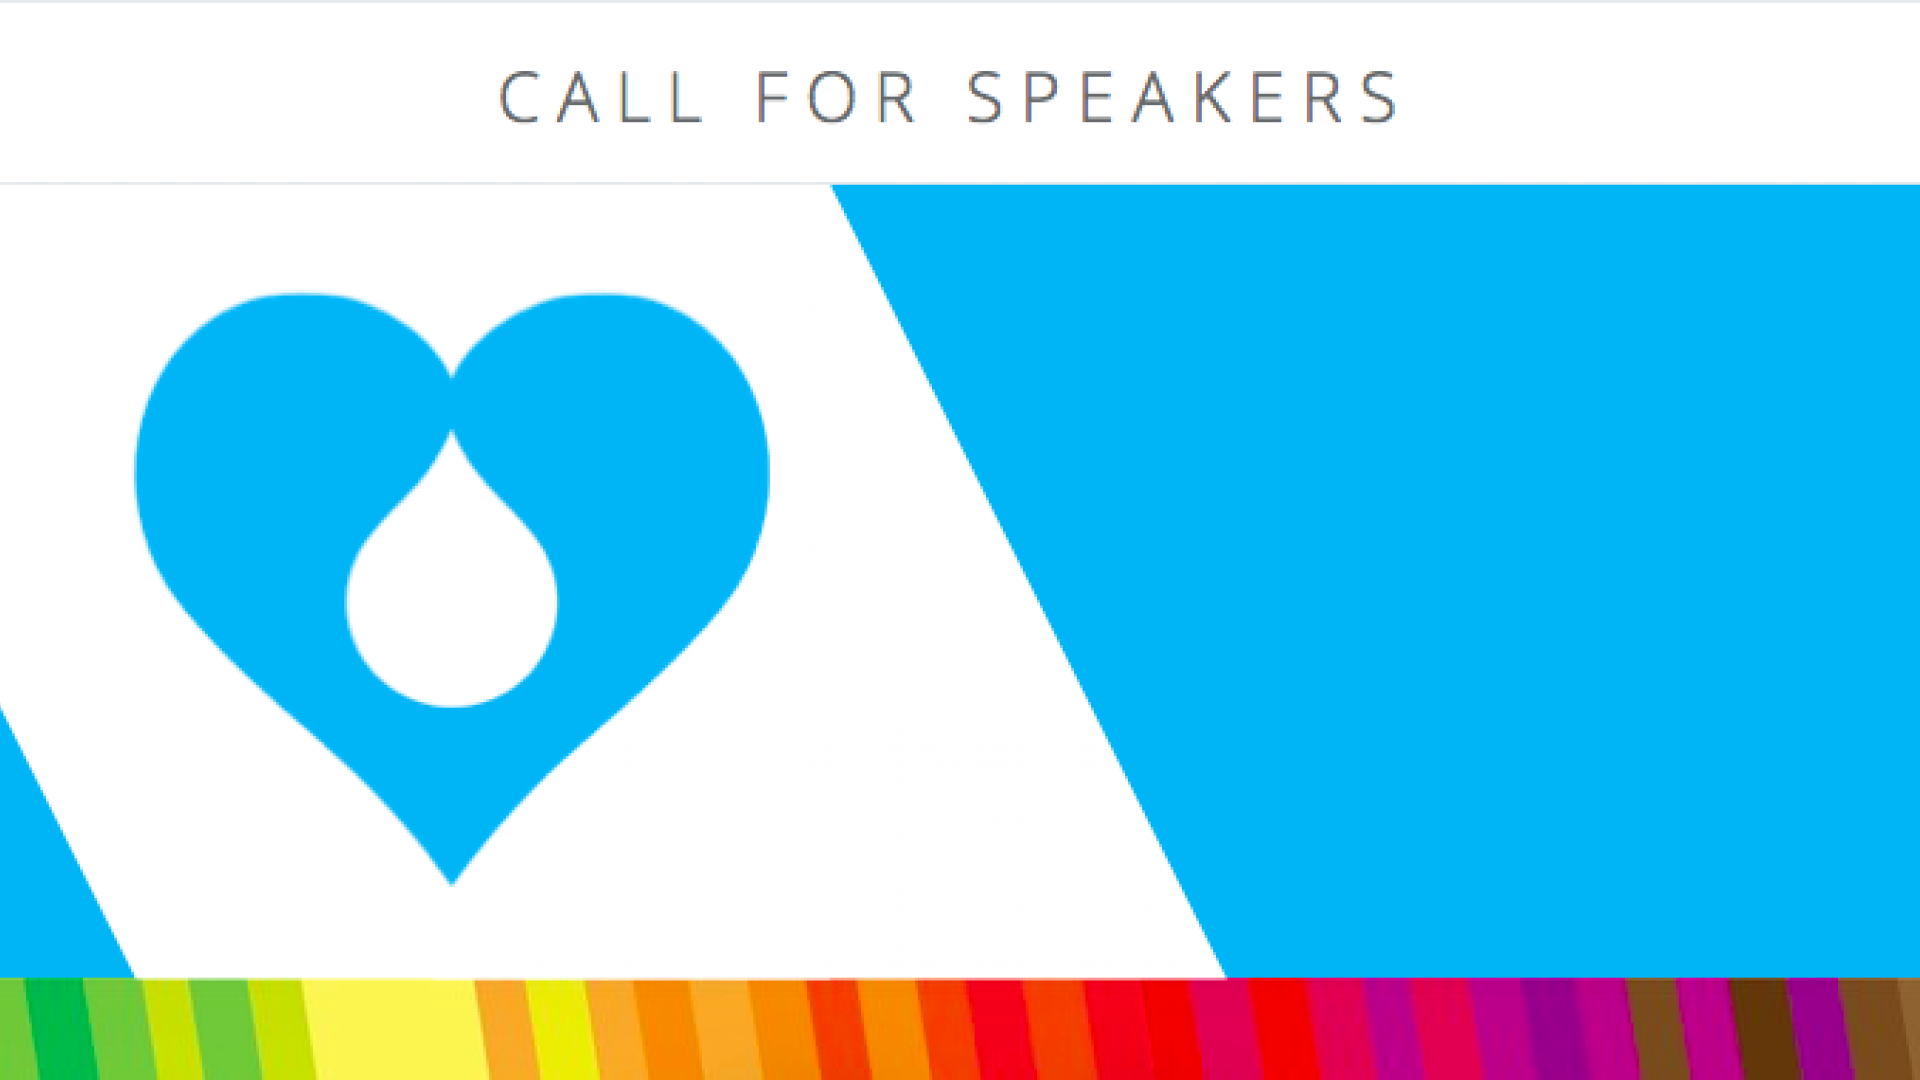 DDI Camp Call for Speakers